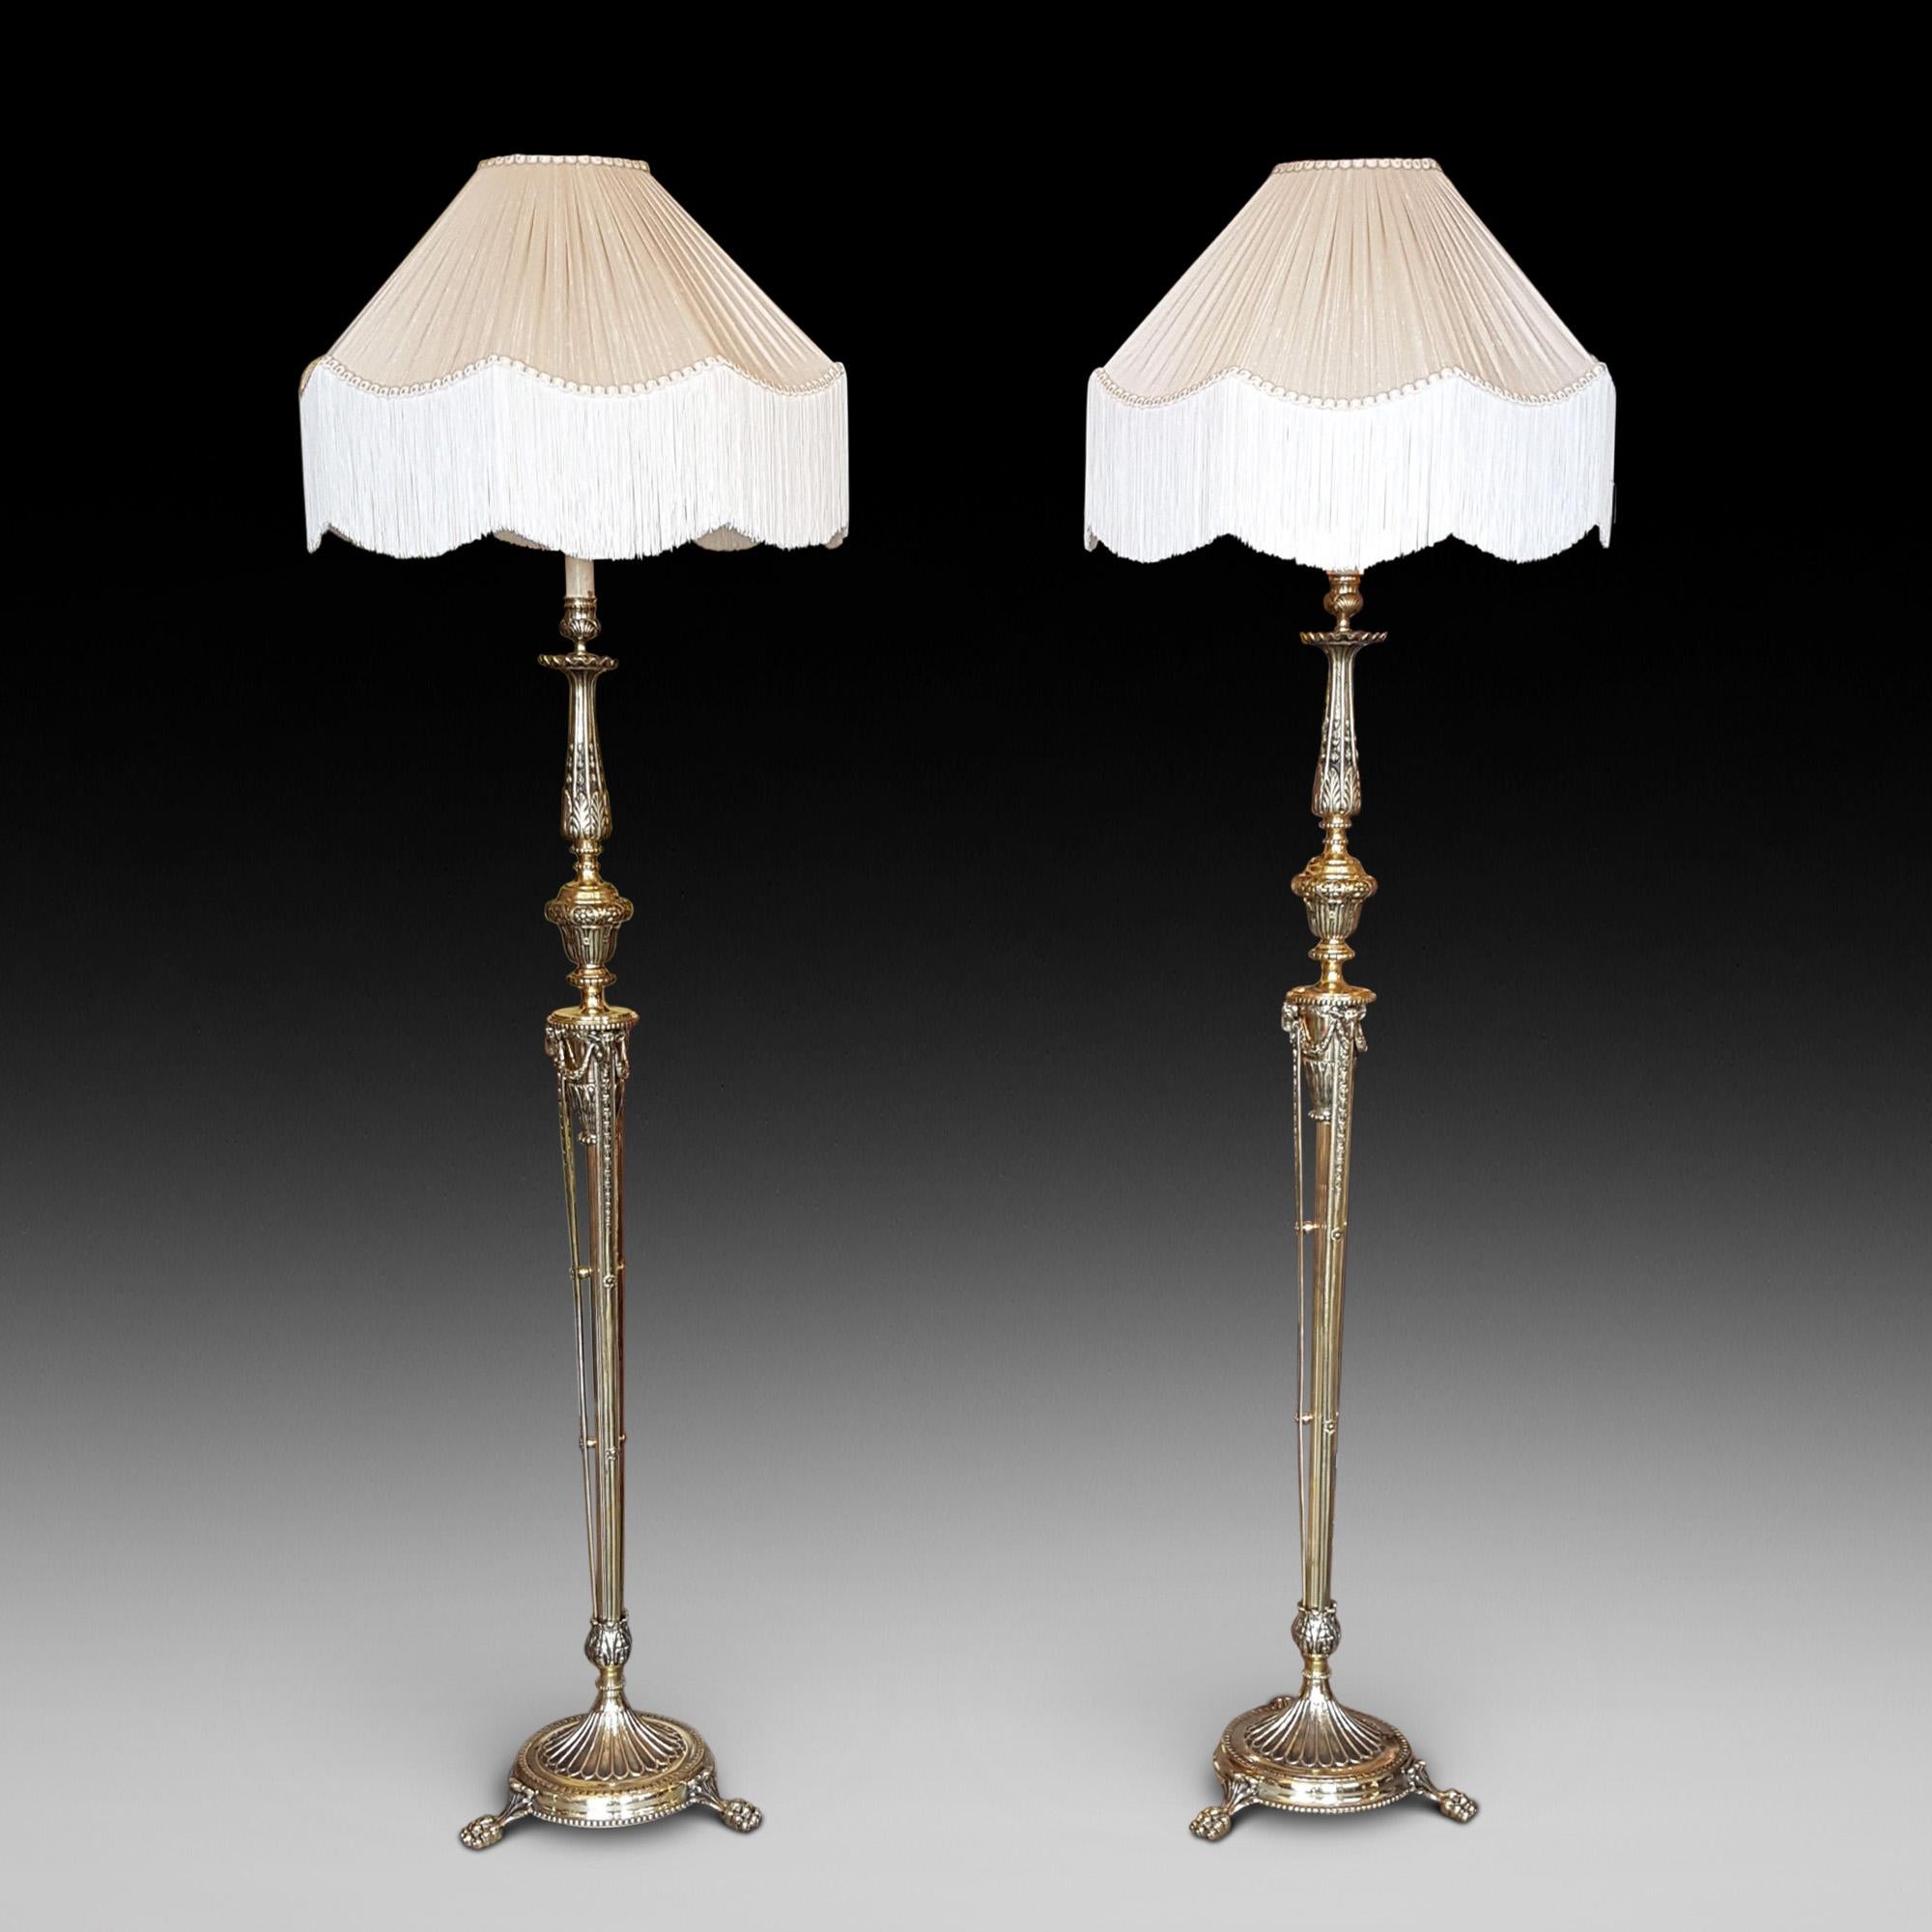 Pair of Edwardian Adam style brass lamp standards, each with bellflower and stiff leaf decoration and with rams heads to each vase support, raised on a circular base with paw feet, the lampshade(s) are newly handmade silks by the same maker as